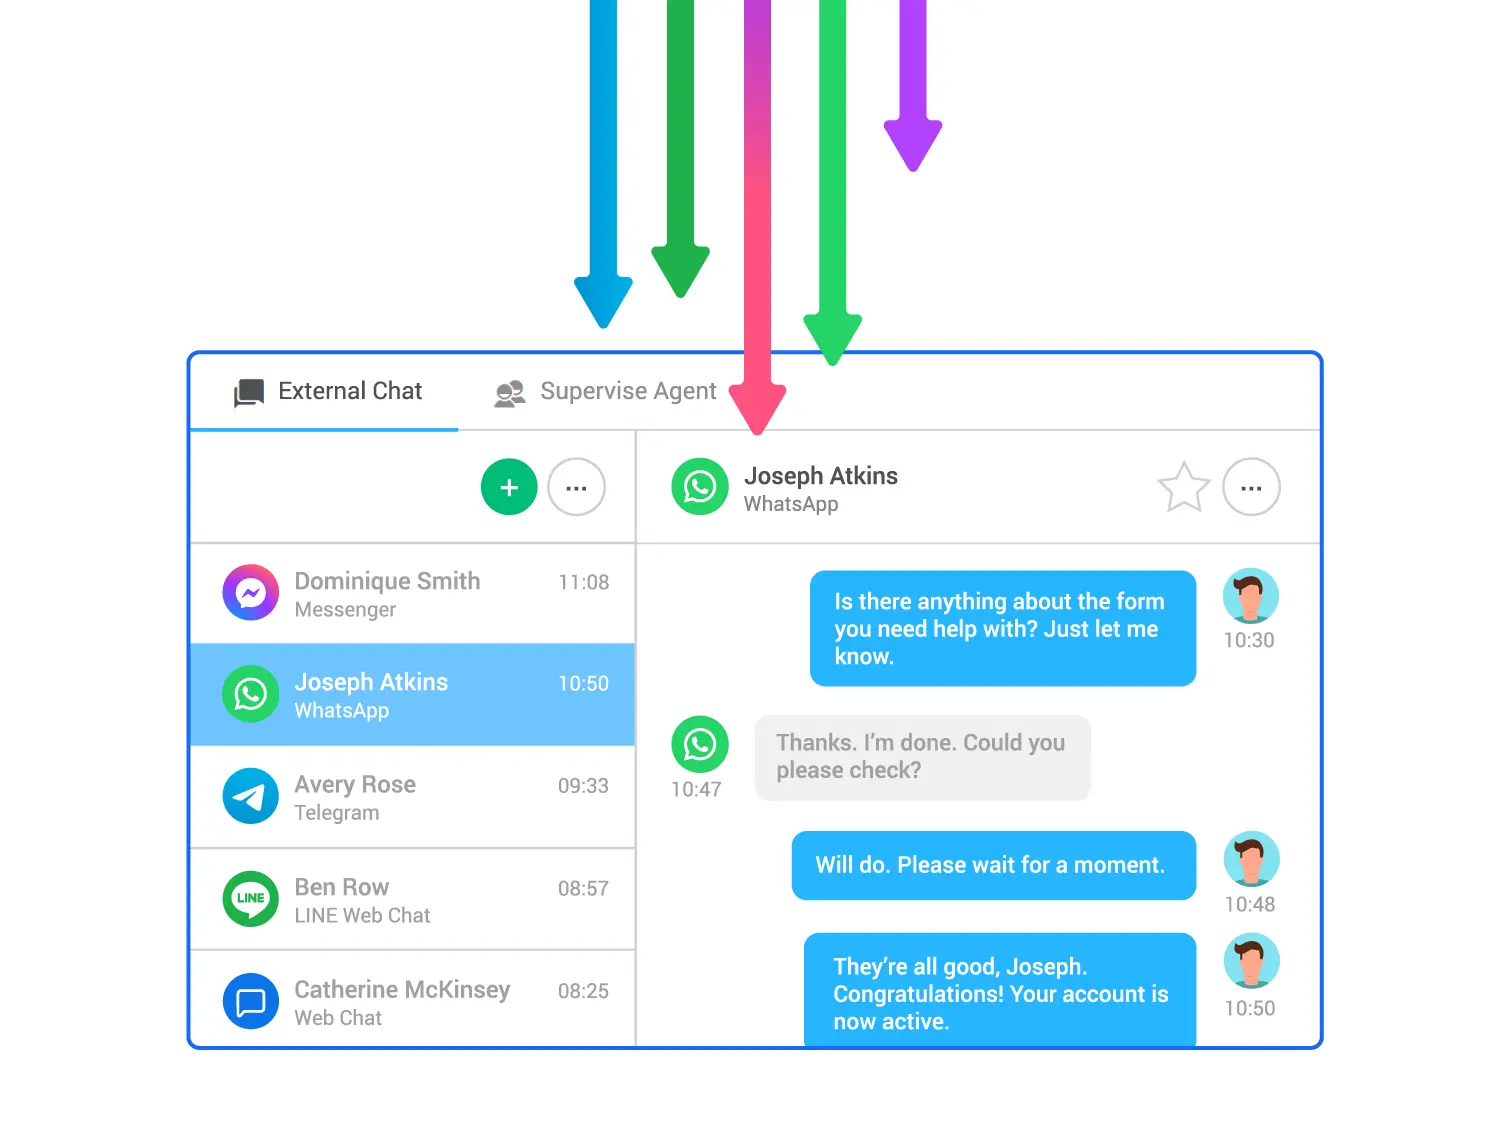 Omnichannel centralized inbox - connecting people to business by messaging apps